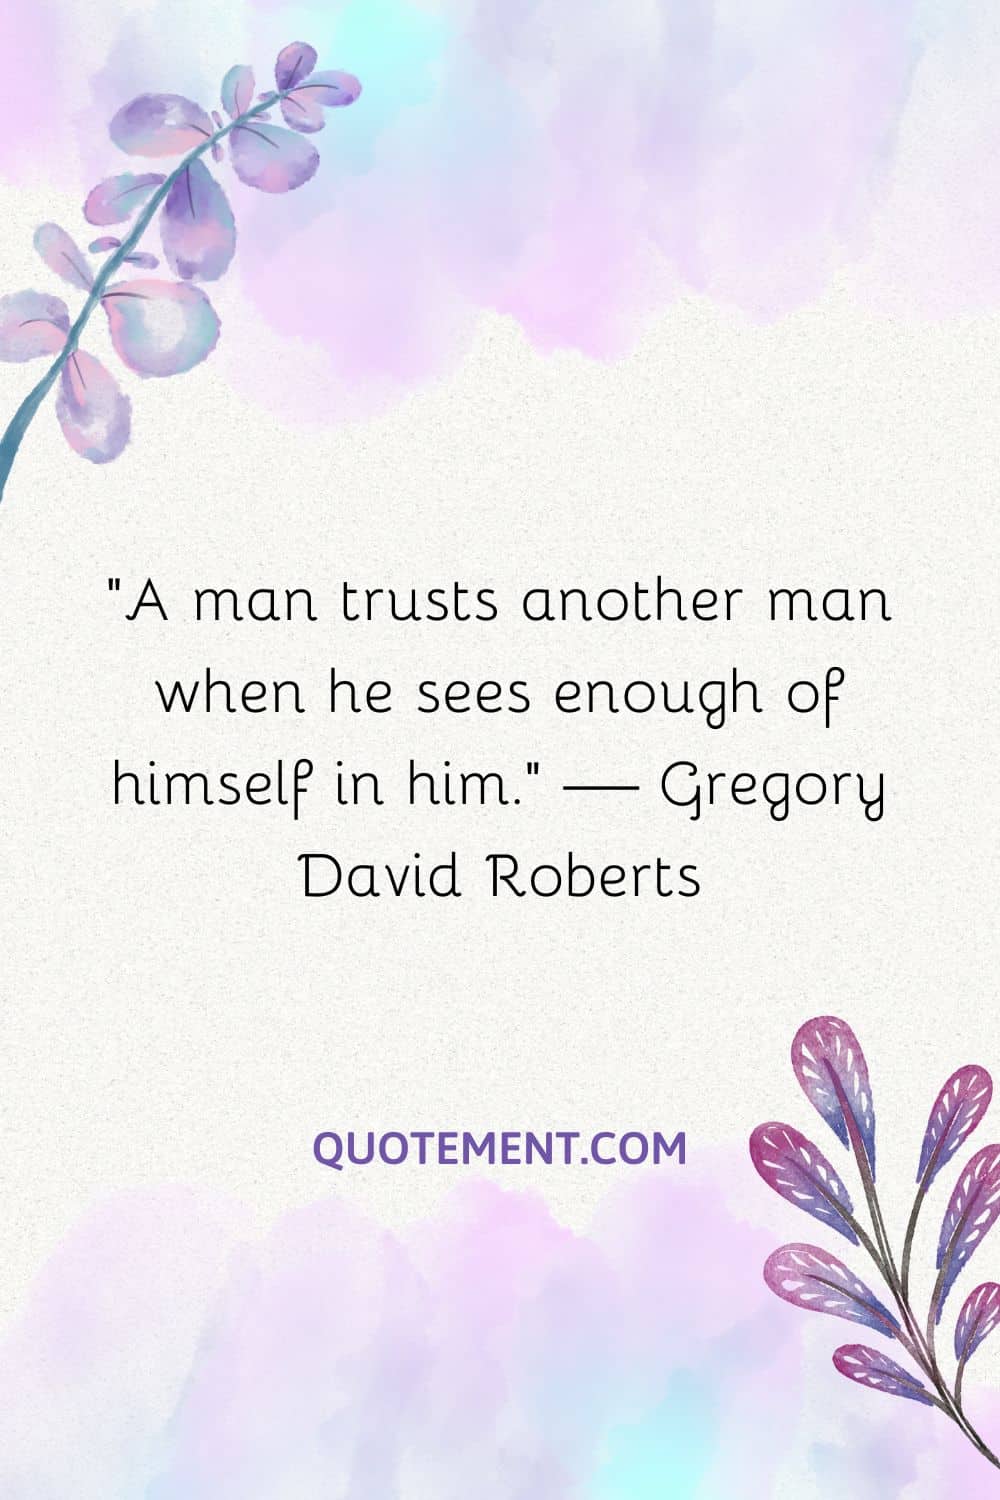 A man trusts another man when he sees enough of himself in him